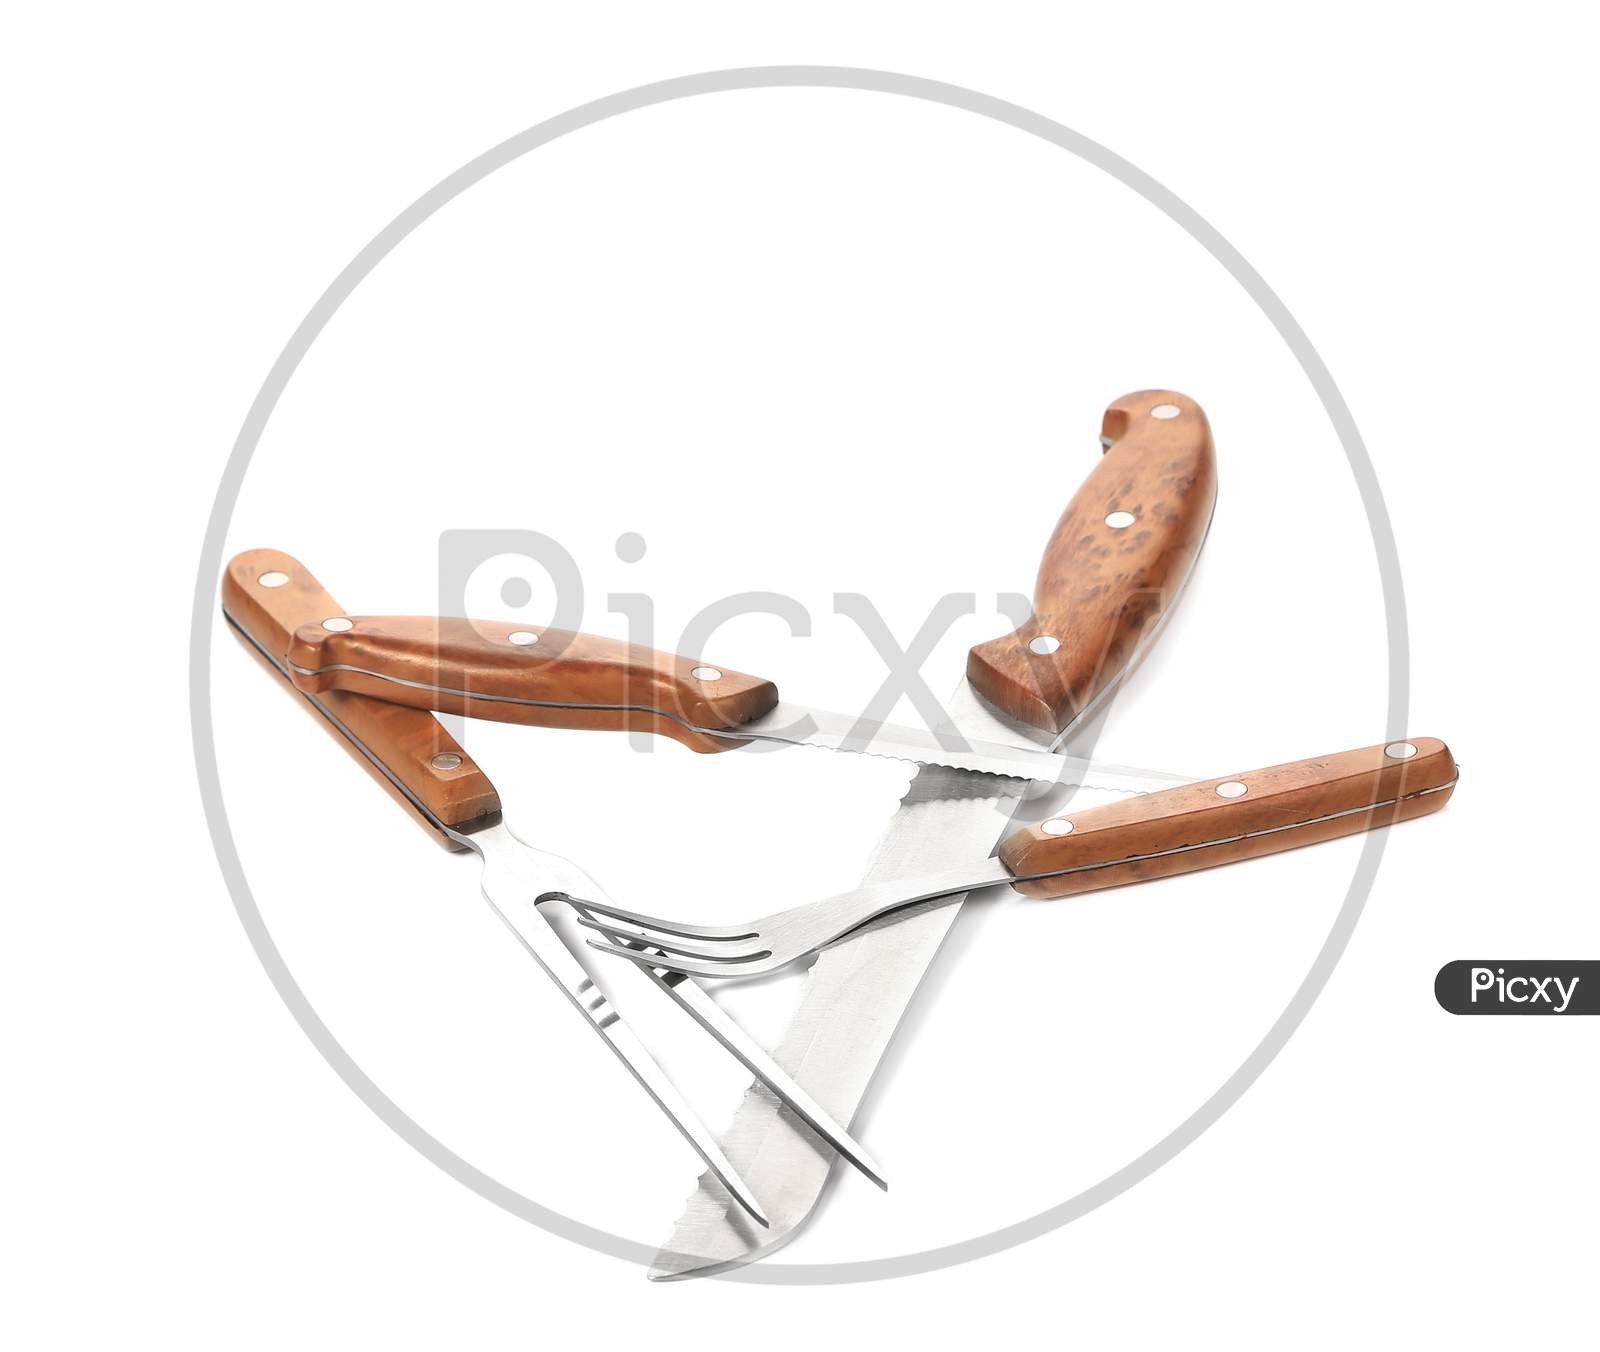 Kitchen Forks And Knifes. Isolated On A White Background.